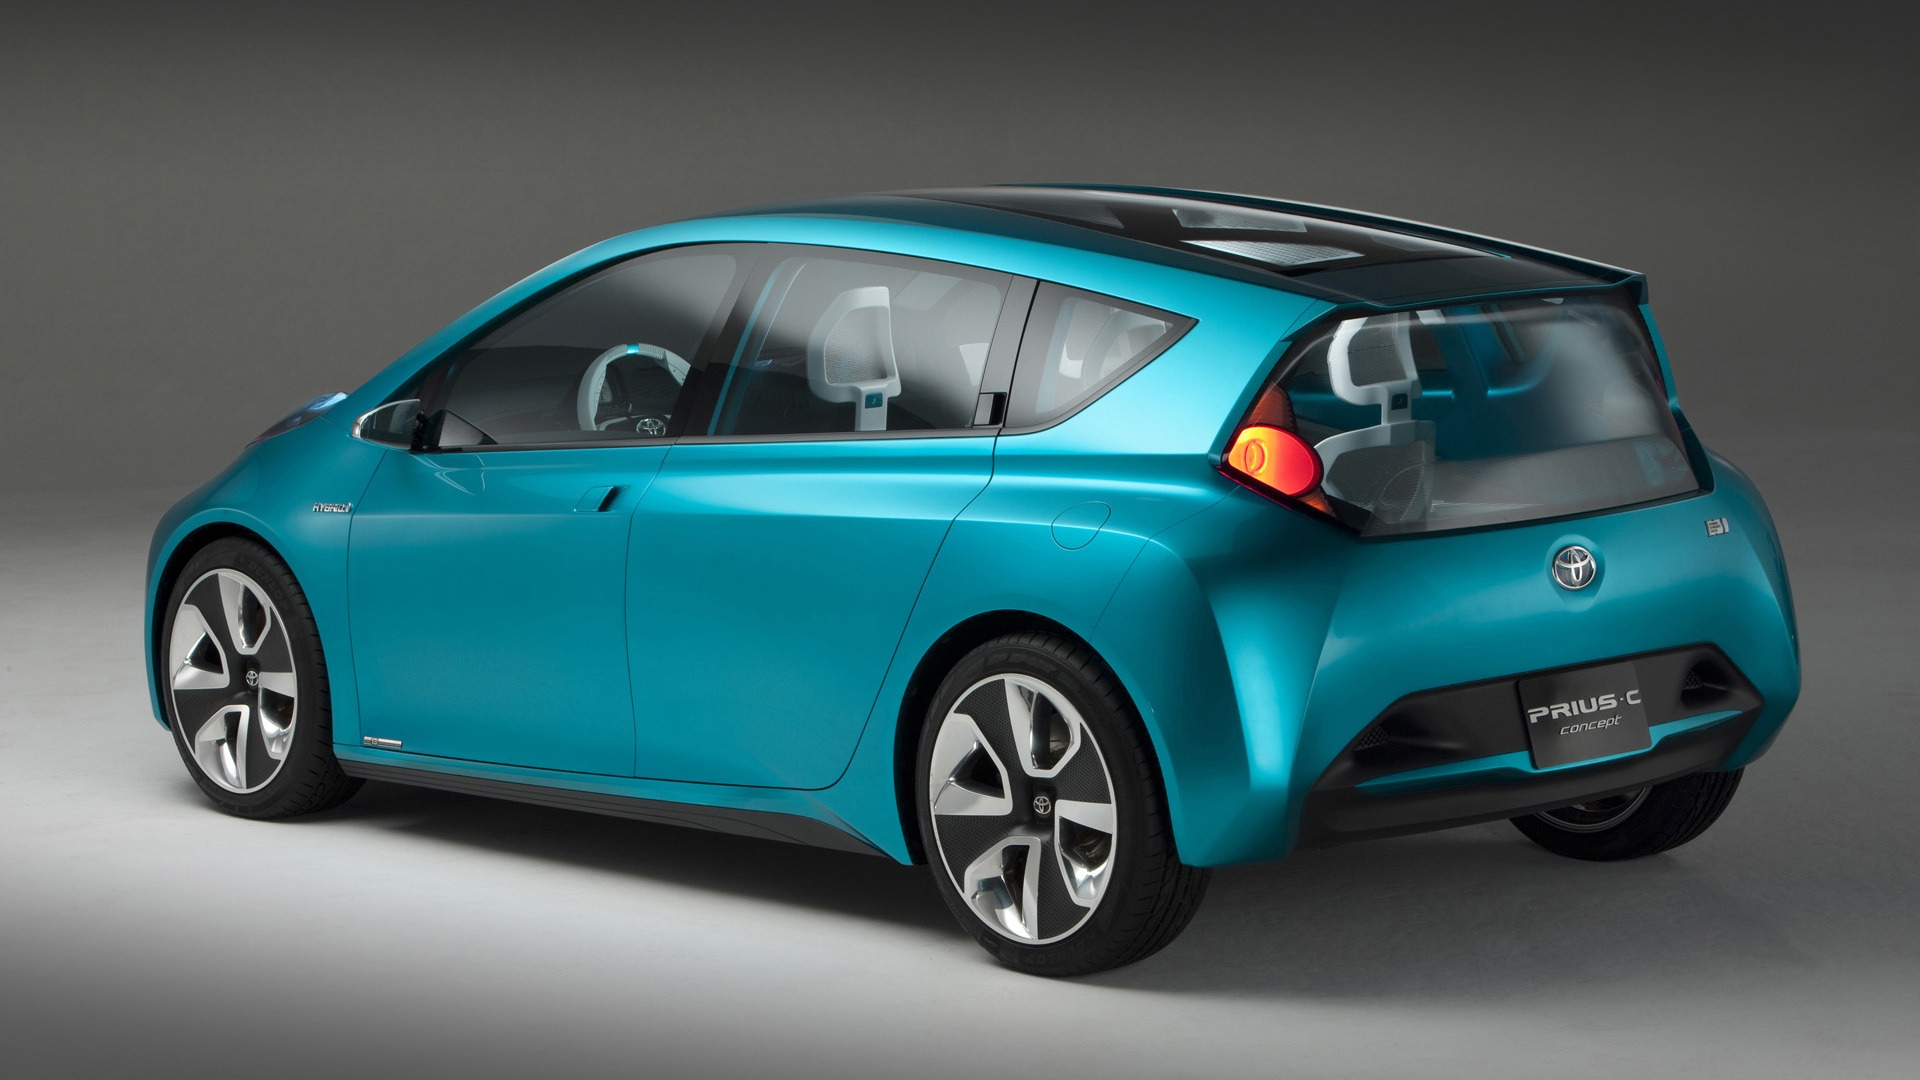 2011 Toyota Prius C Concept Rear for 1920 x 1080 HDTV 1080p resolution